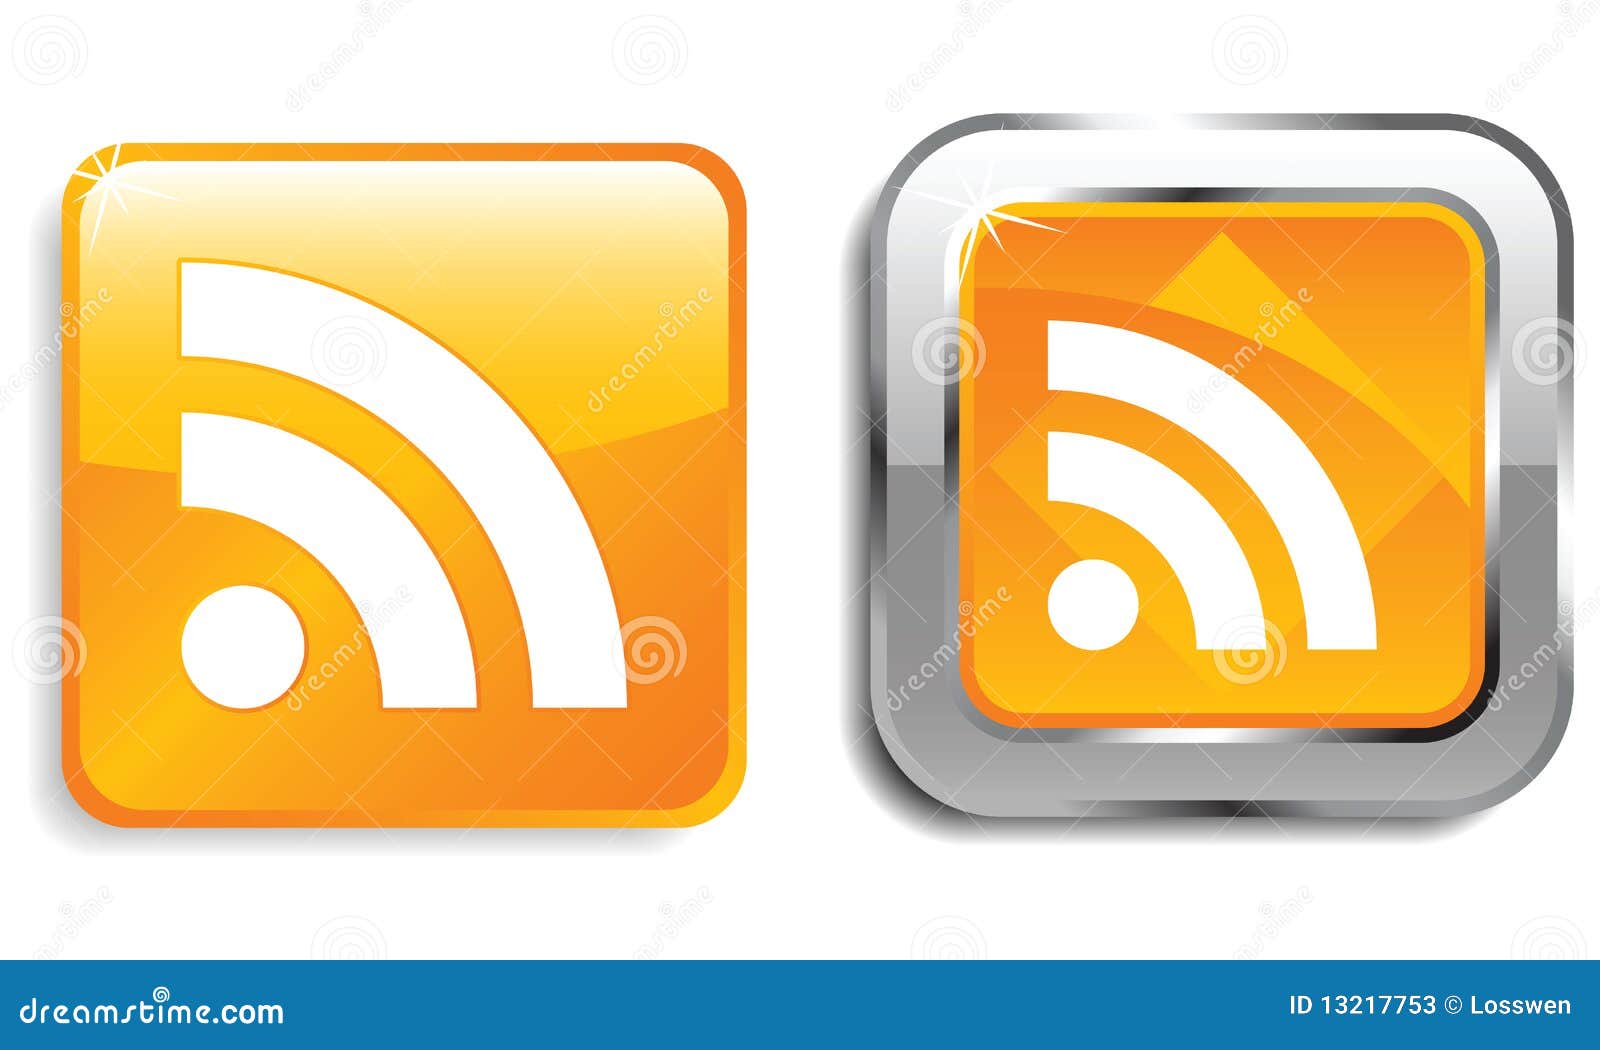 rss web icons